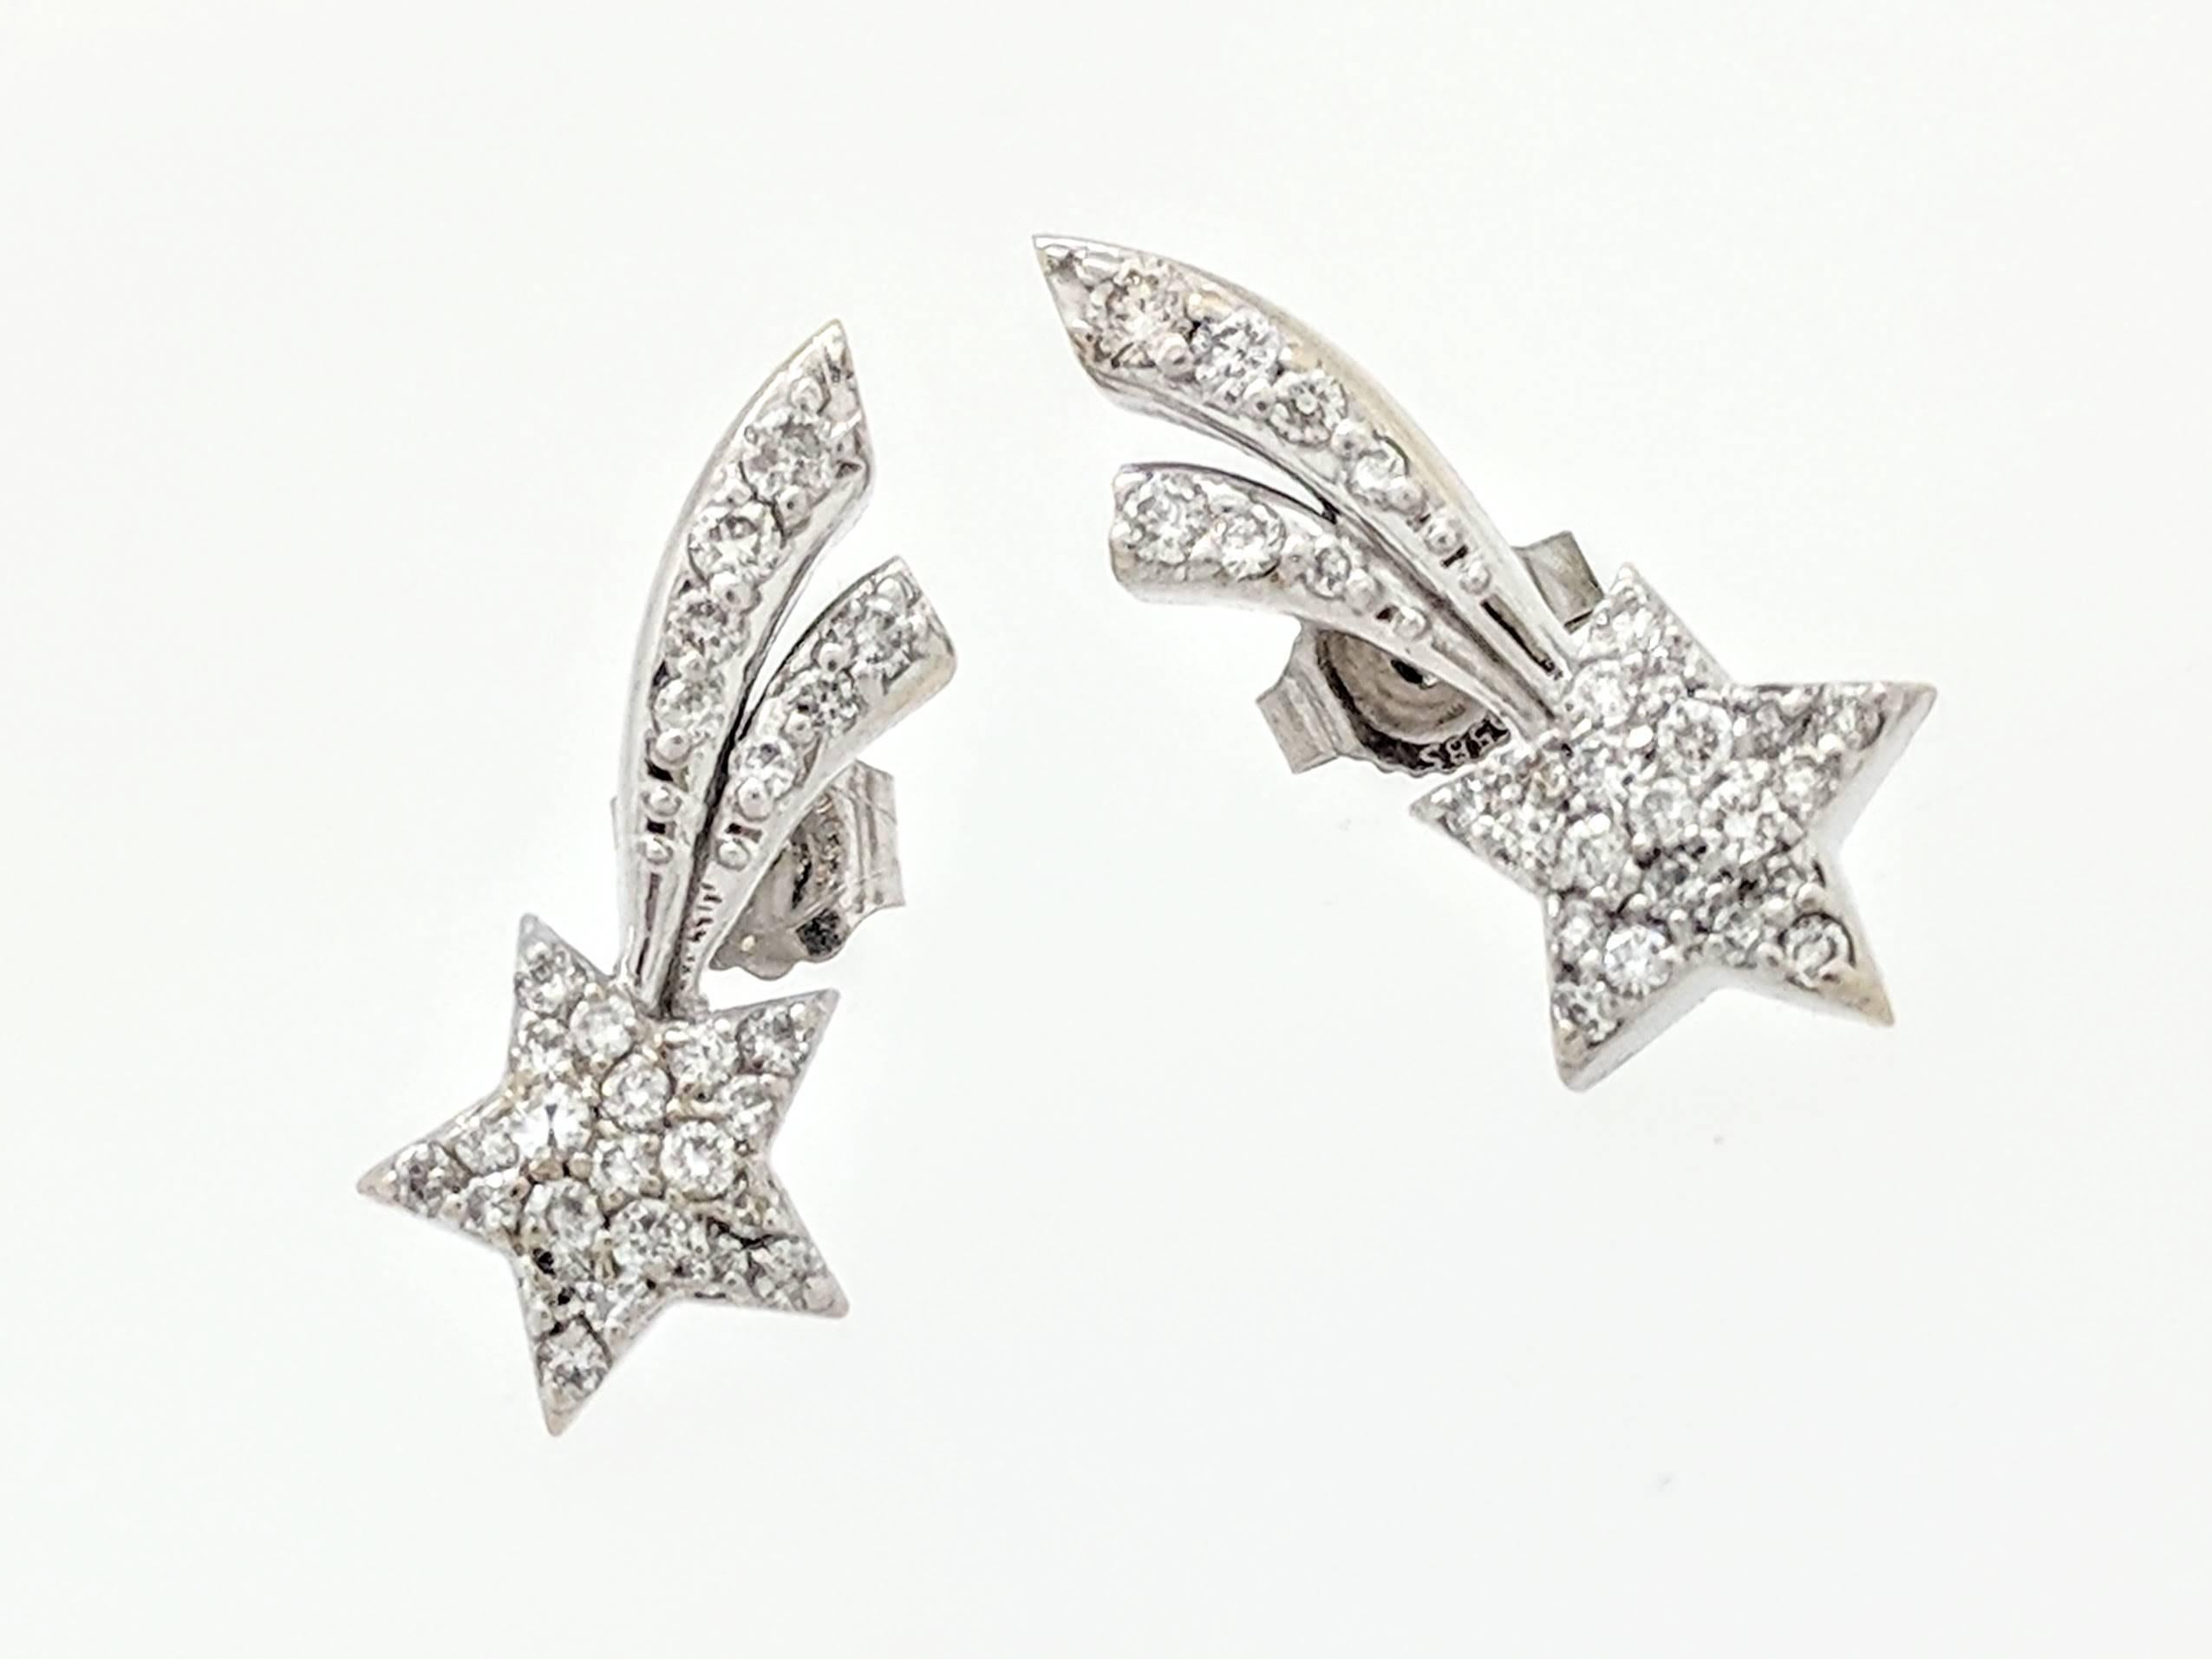 14K White Gold .50ctw Diamond Shooting Star Stud Earrings

You are viewing a pair of gorgeous diamond shooting star stud earrings. These earrings are crafted from 14k white gold and weigh 2.8 grams. They measure 3/4